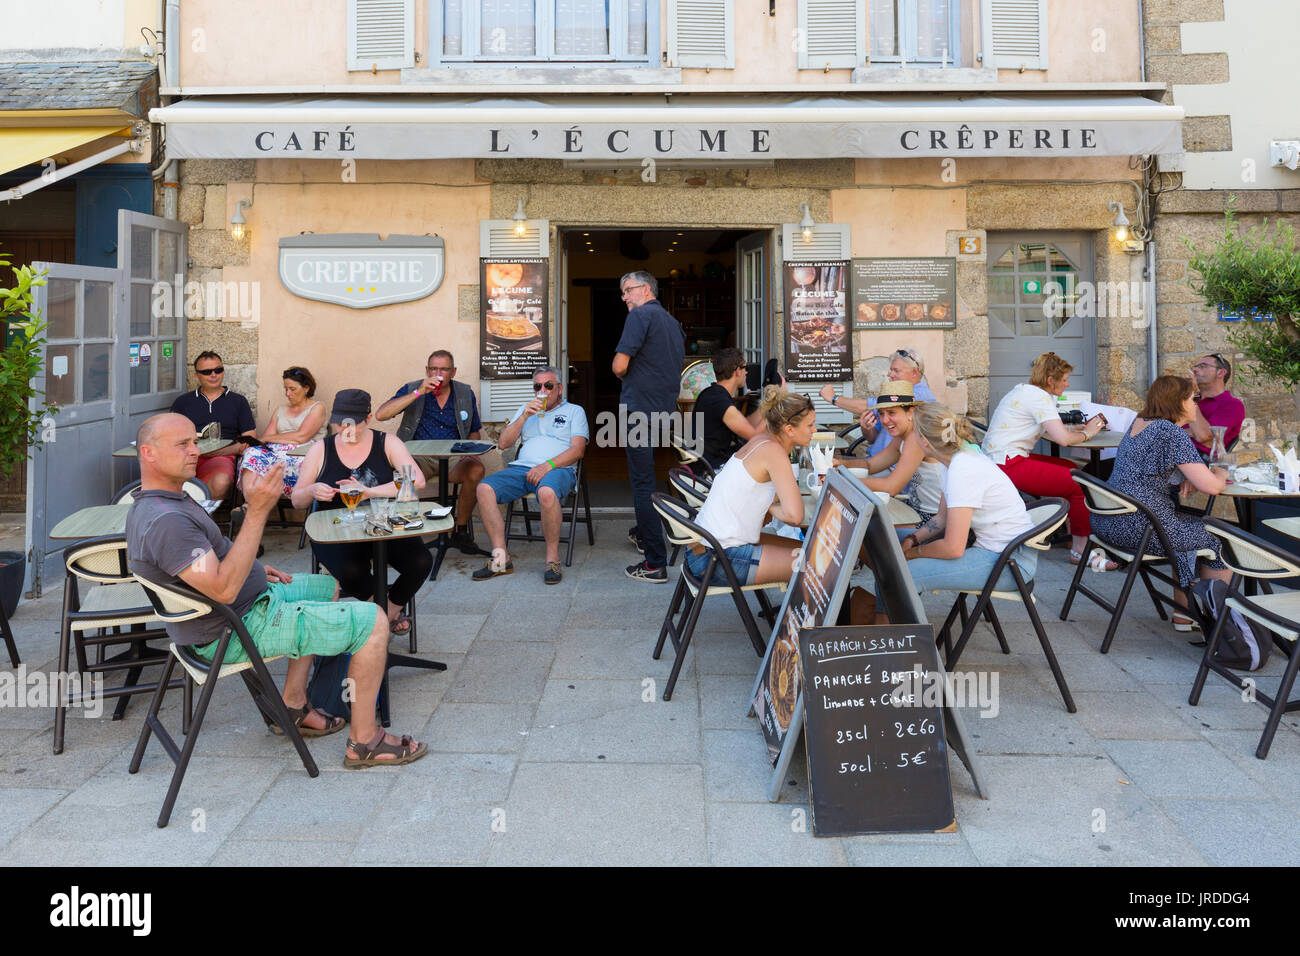 French cafe - people eating and drinking at a creperie or cafe, Concarneau, Brittany France Stock Photo